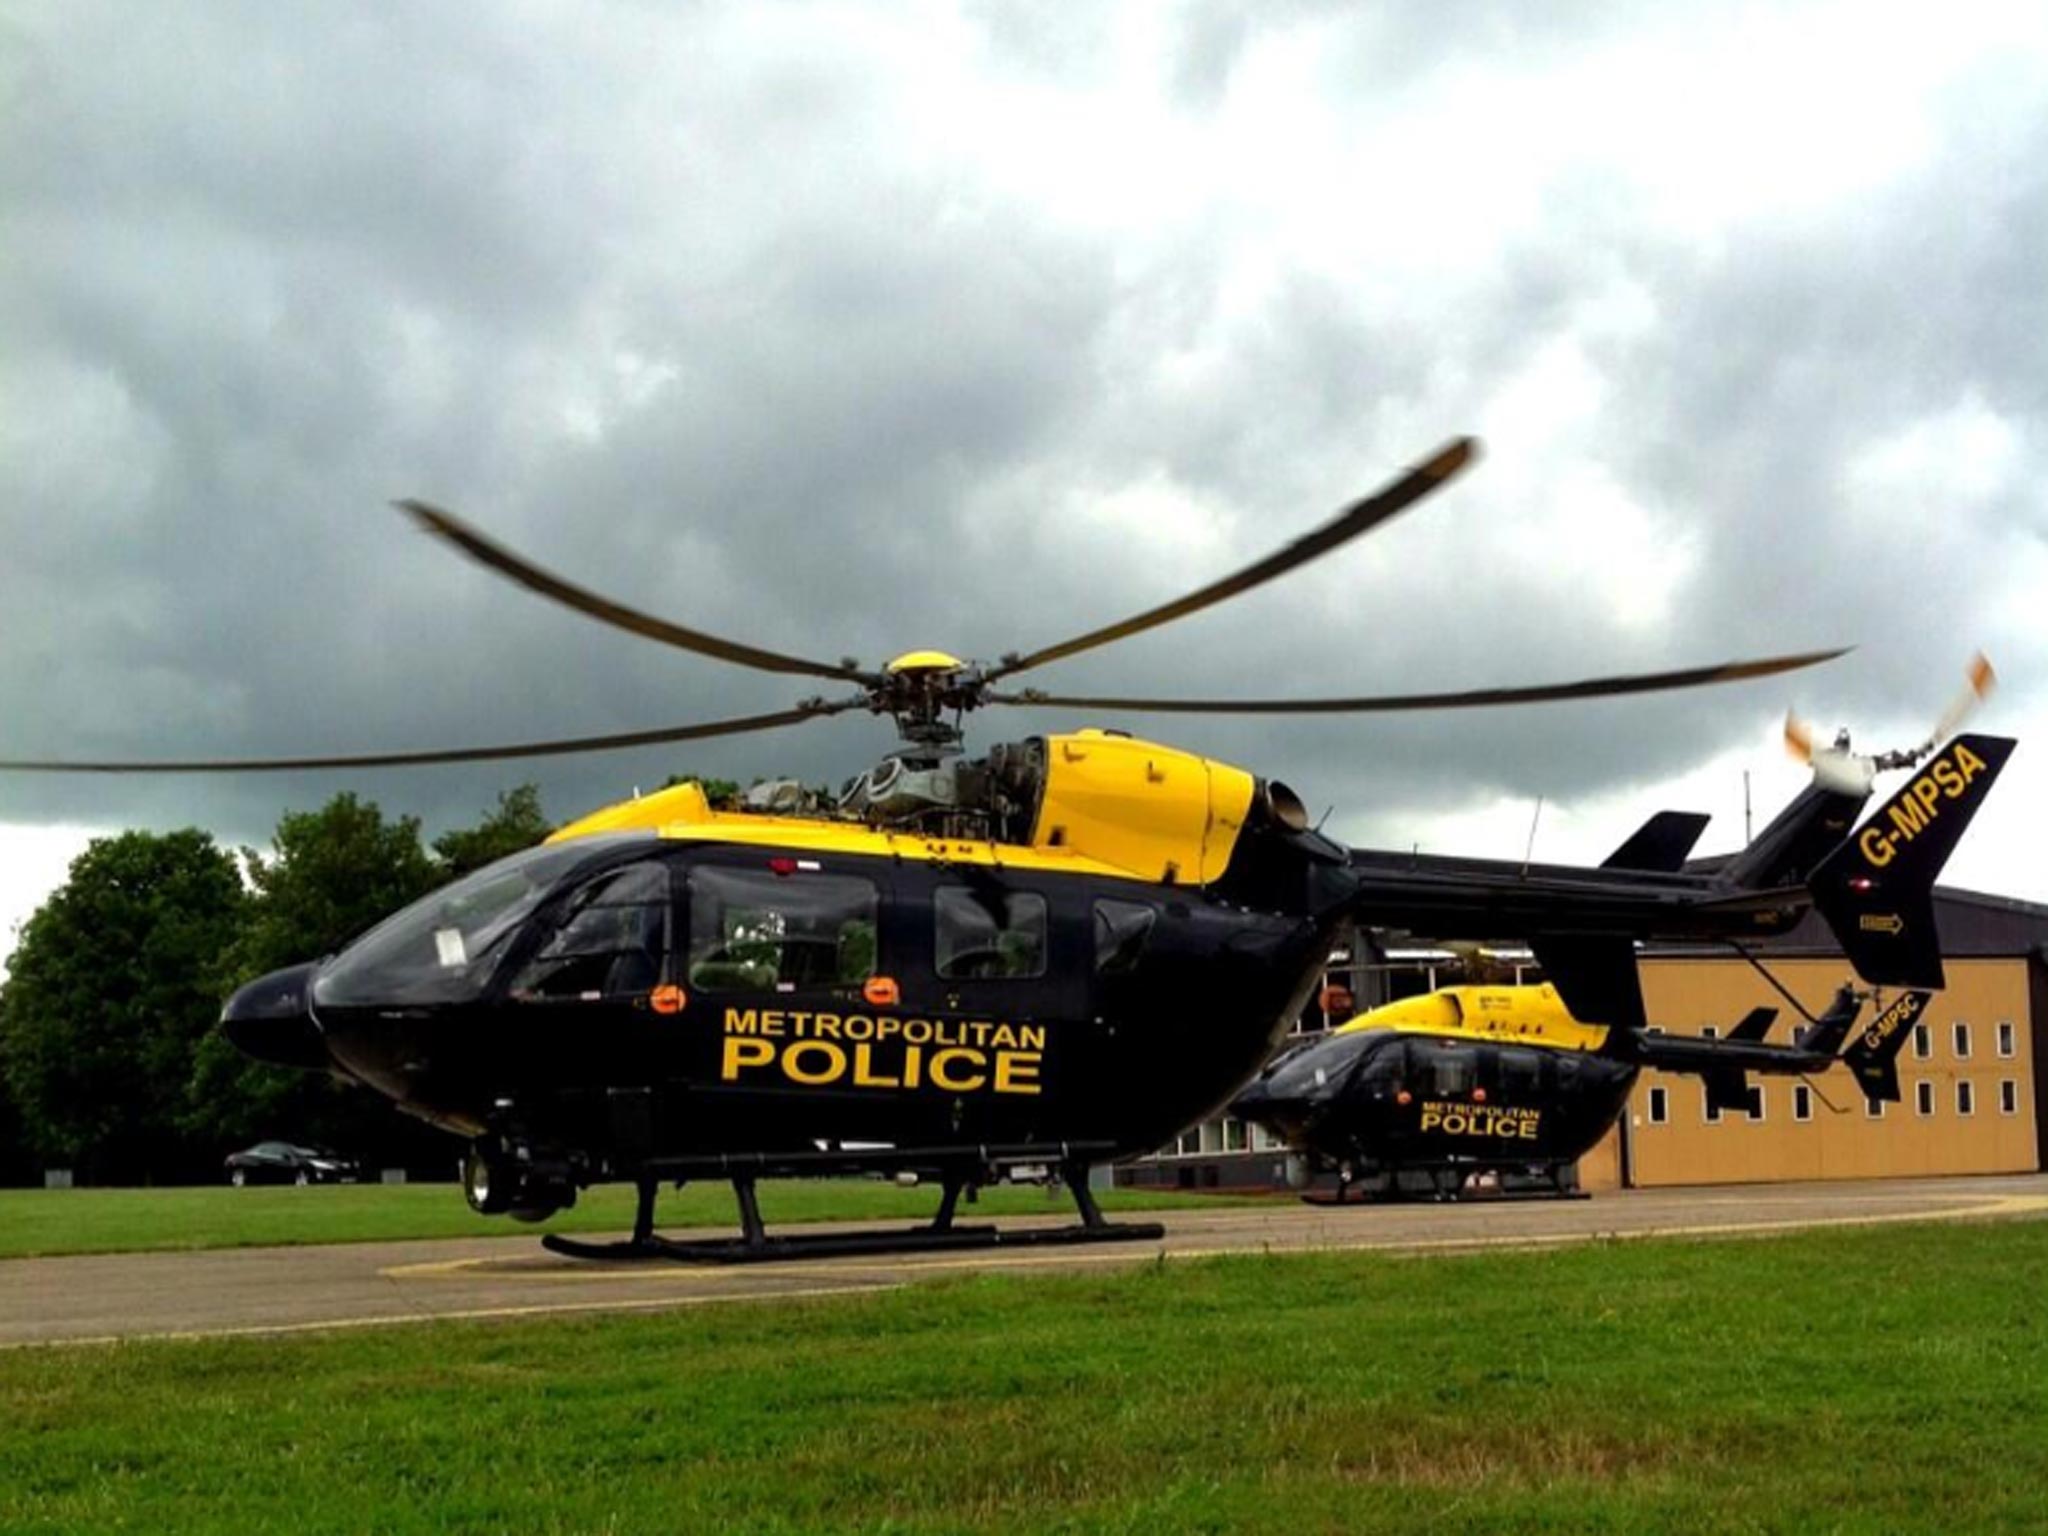 Helicopters used by the Metropolitan Police